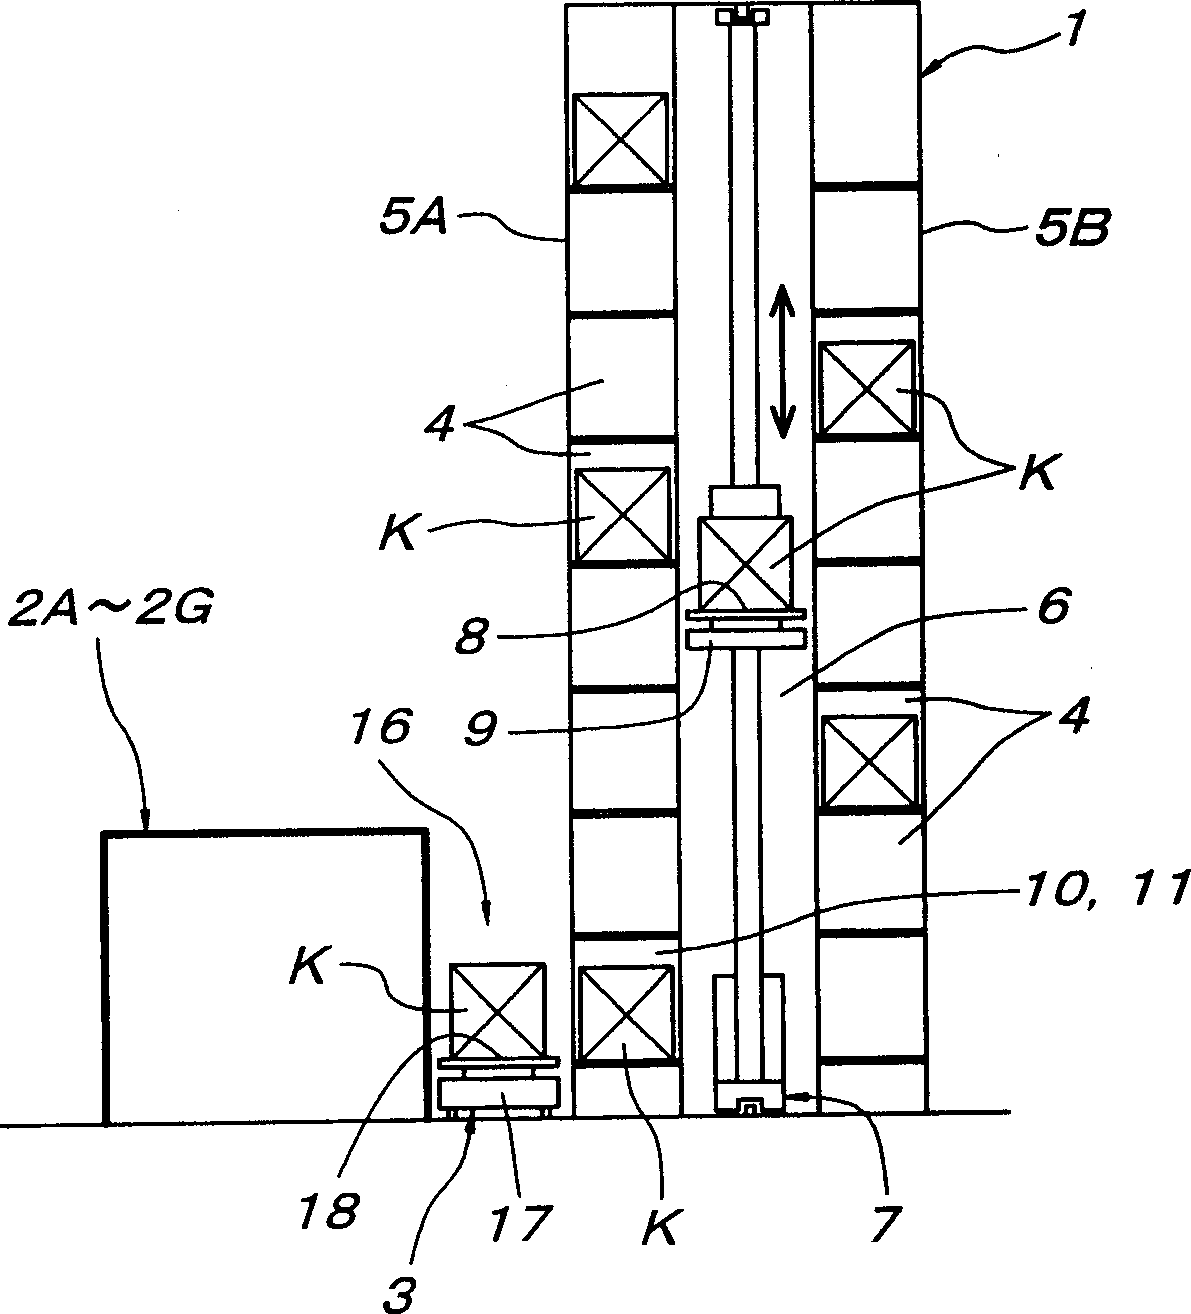 Handling and managing device